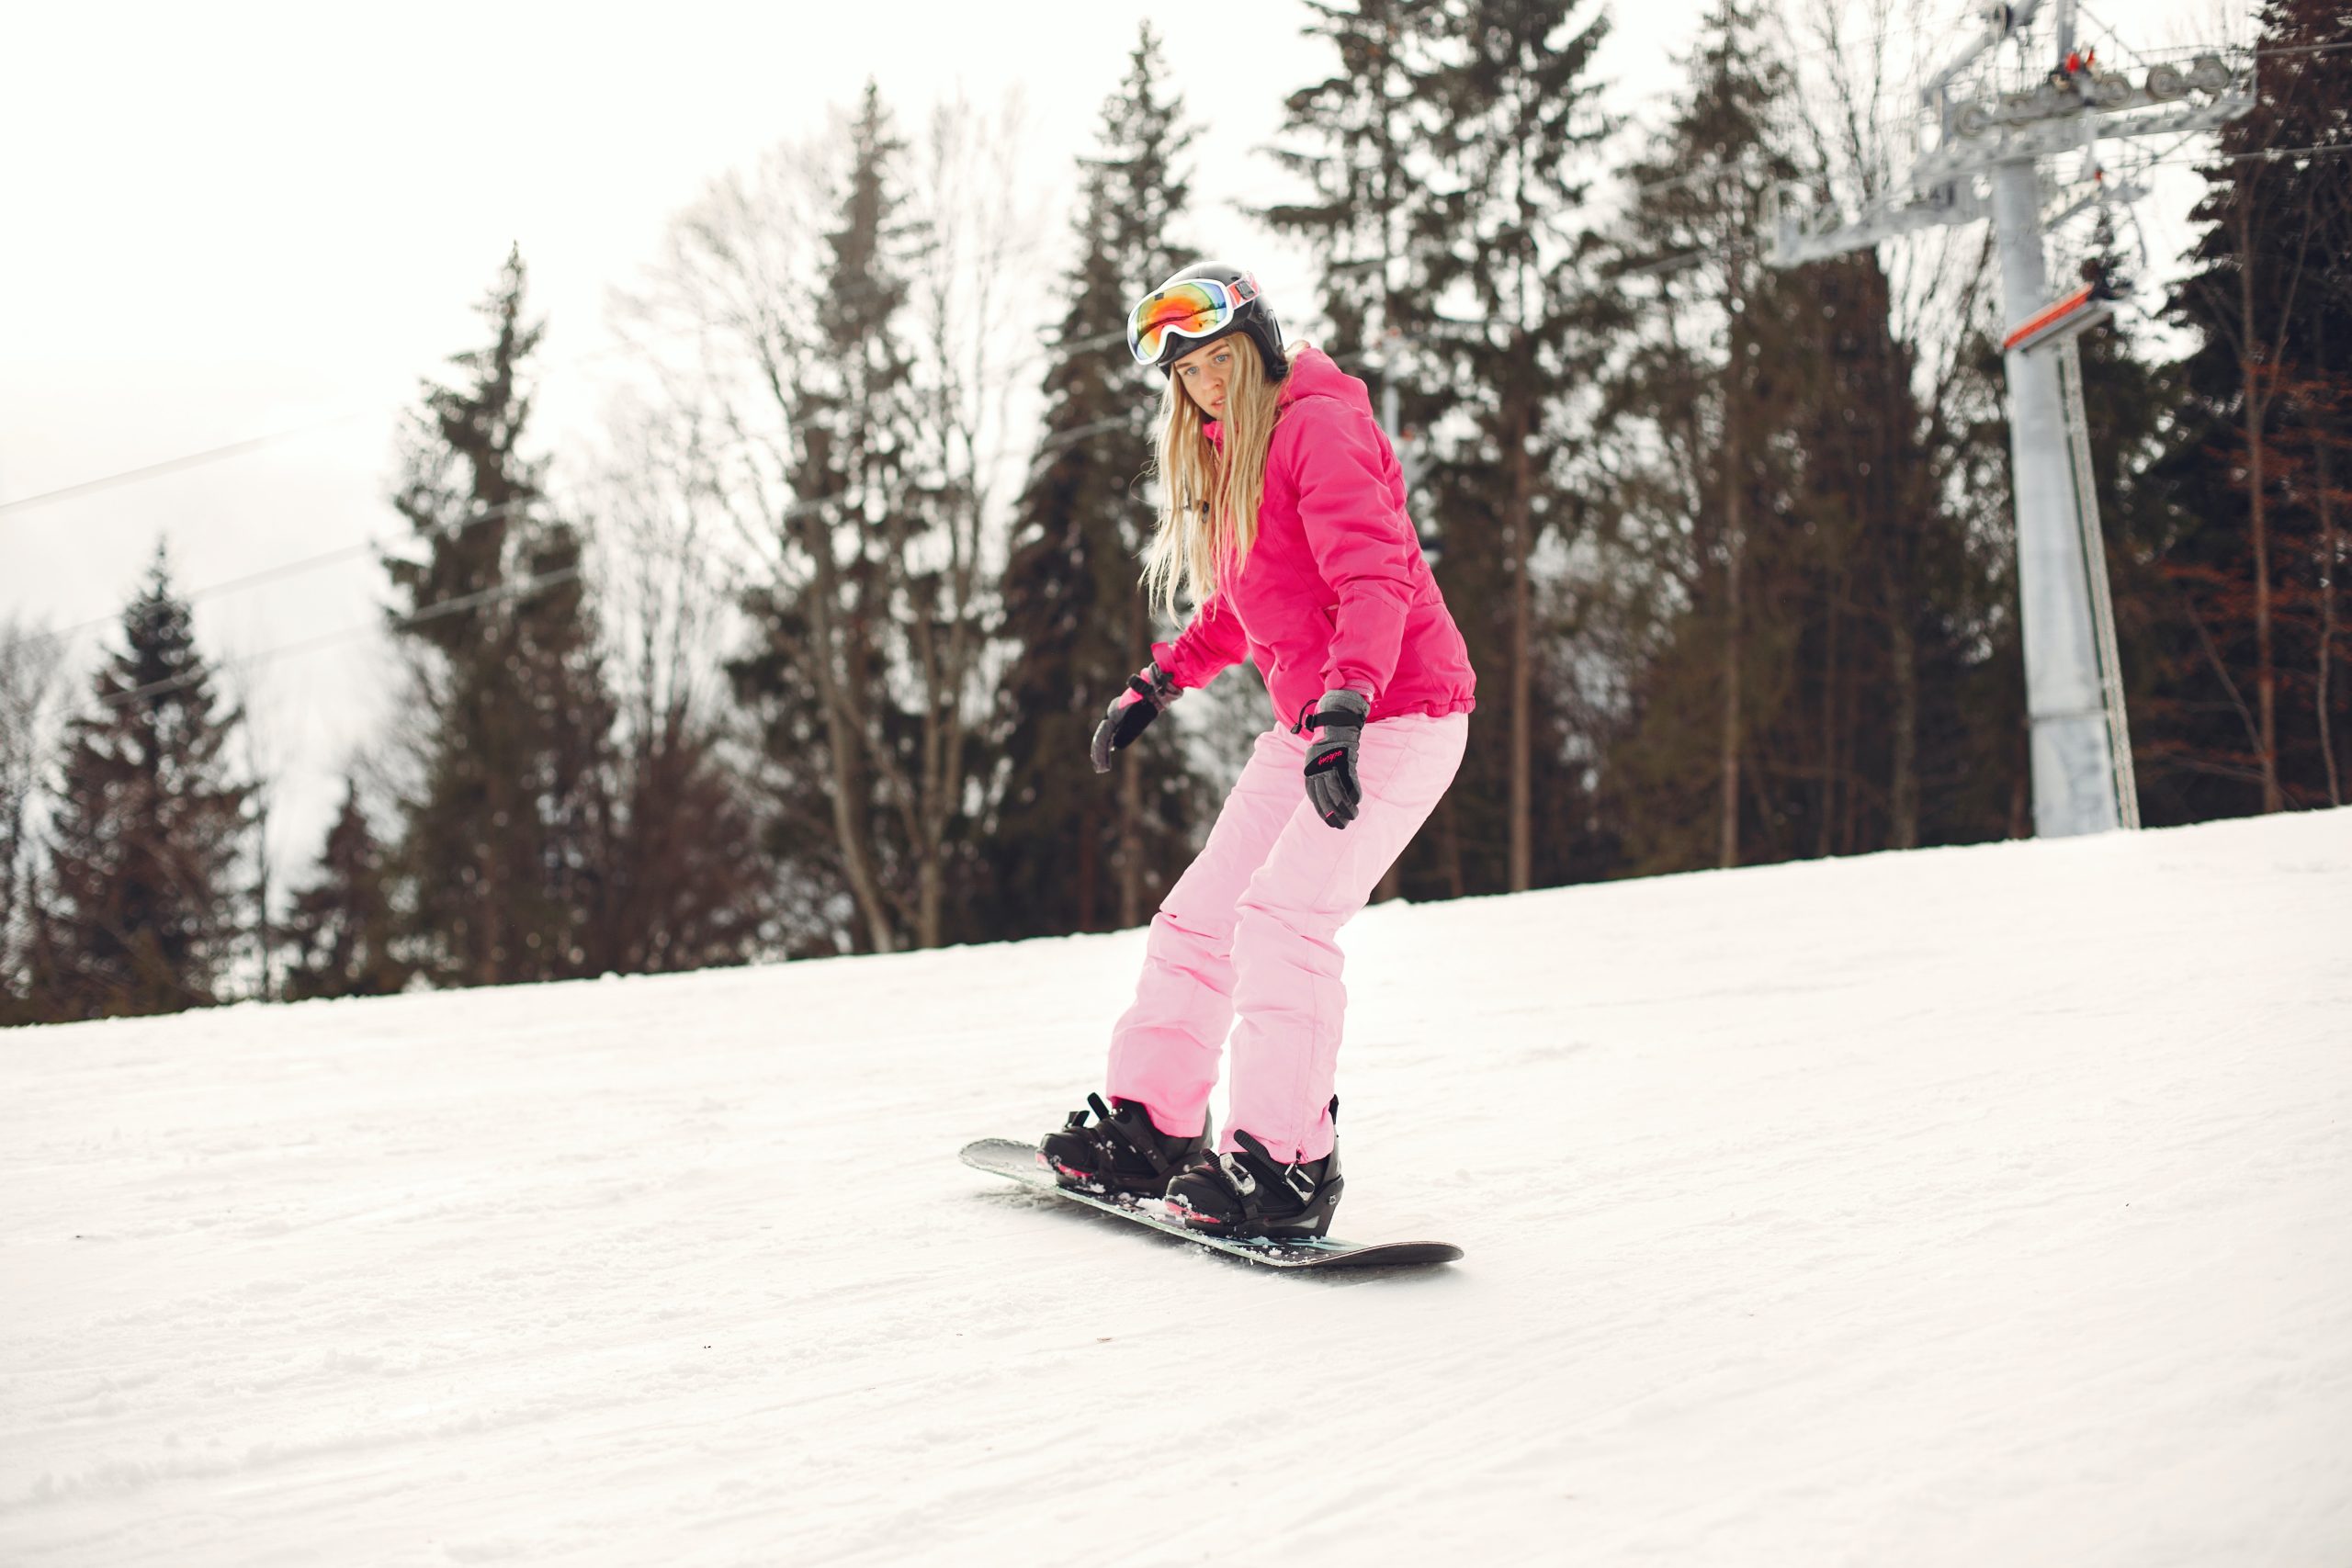 Foot Pain While Skiing or Snowboarding?